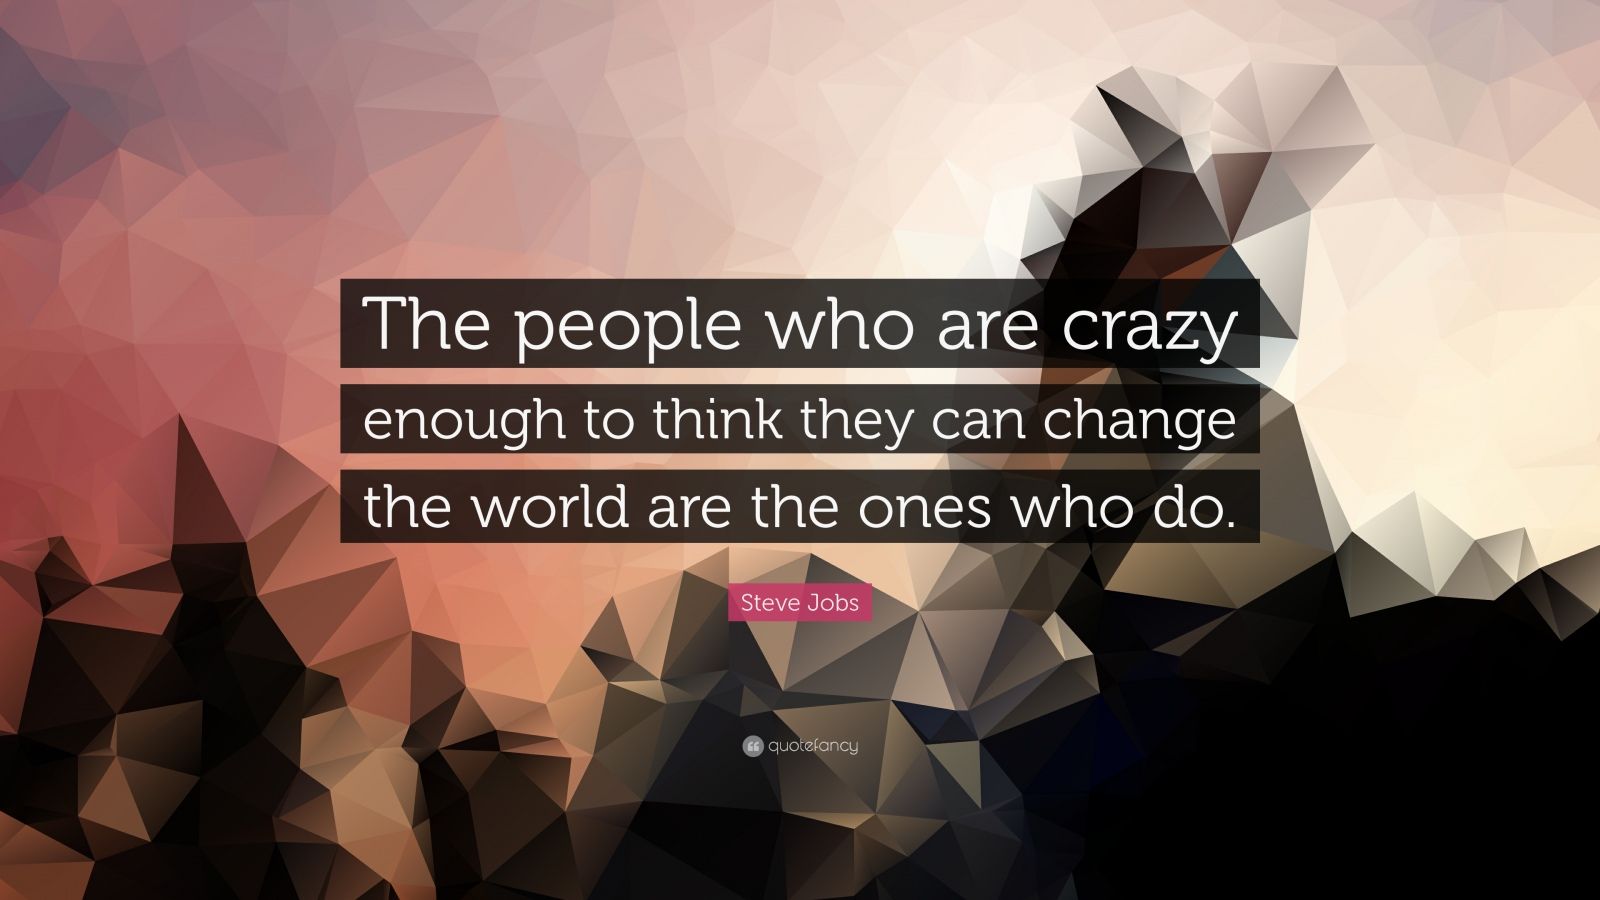 9935 Steve Jobs Quote The people who are crazy enough to think they can